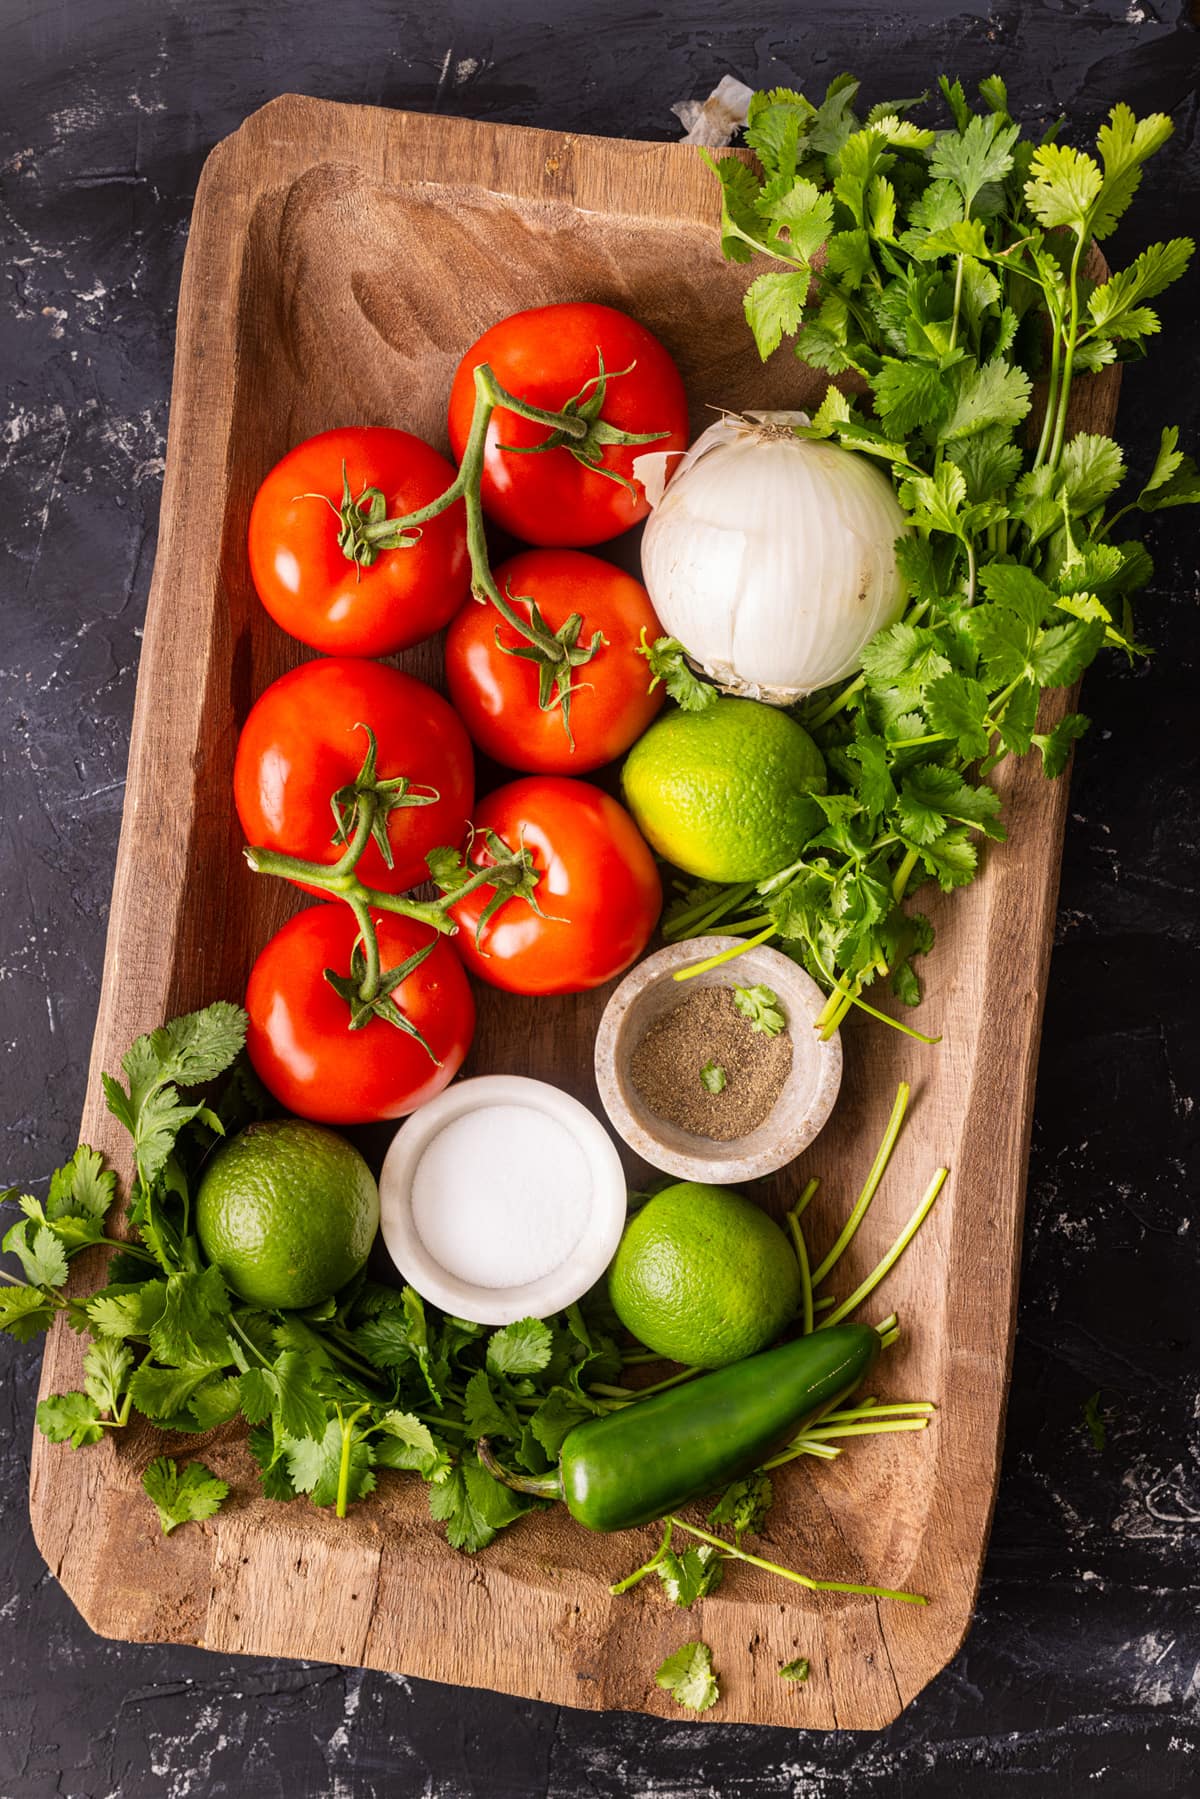 Ingredients for Pico de Gallo in a wood tray.